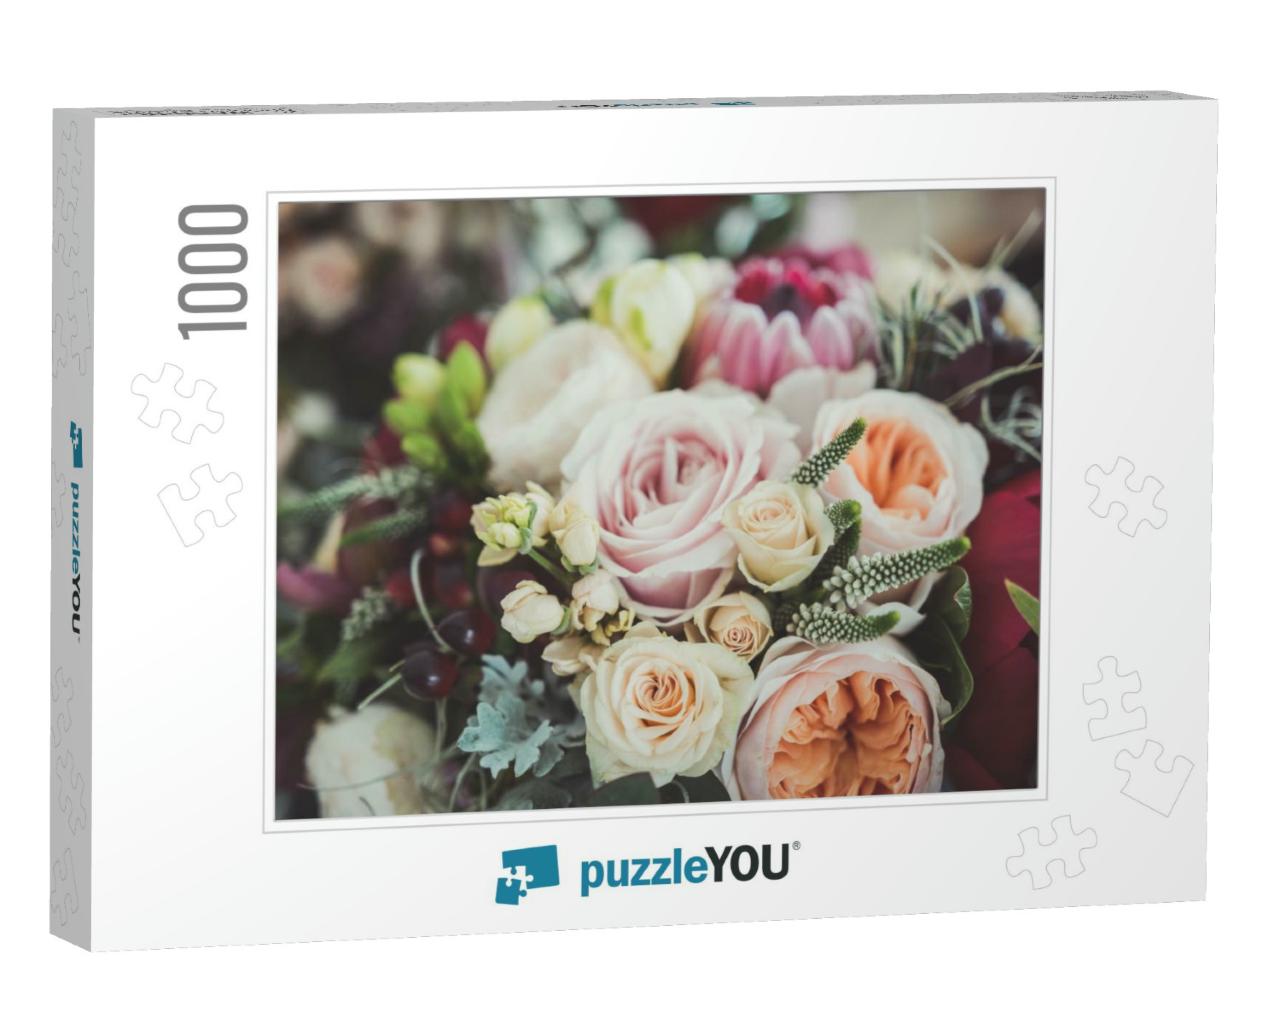 Roses in a Brides Flower Bouquet... Jigsaw Puzzle with 1000 pieces